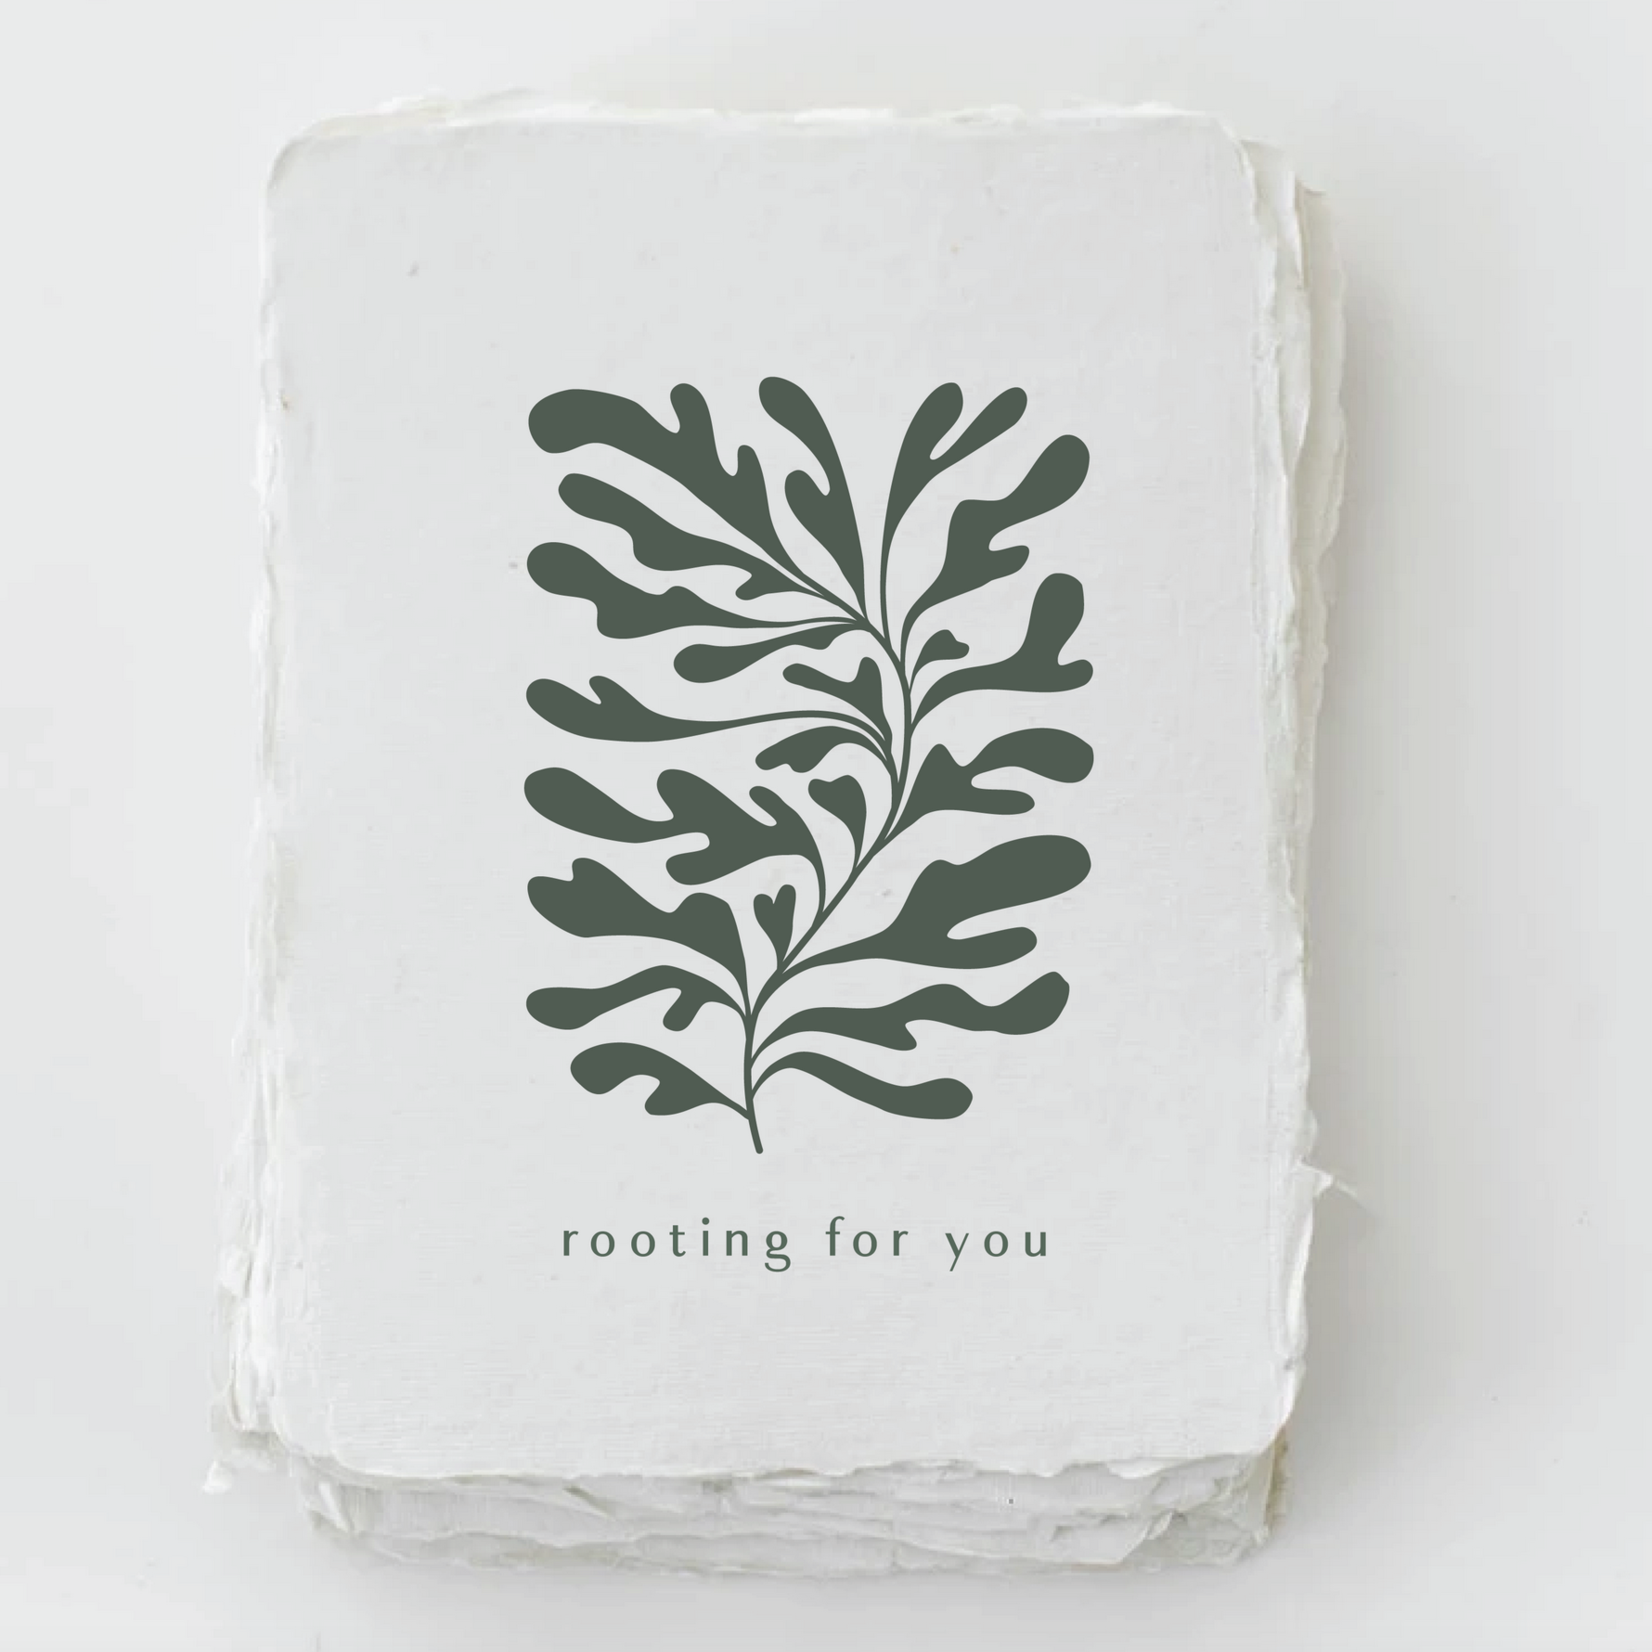 *"Rooting for You" Card